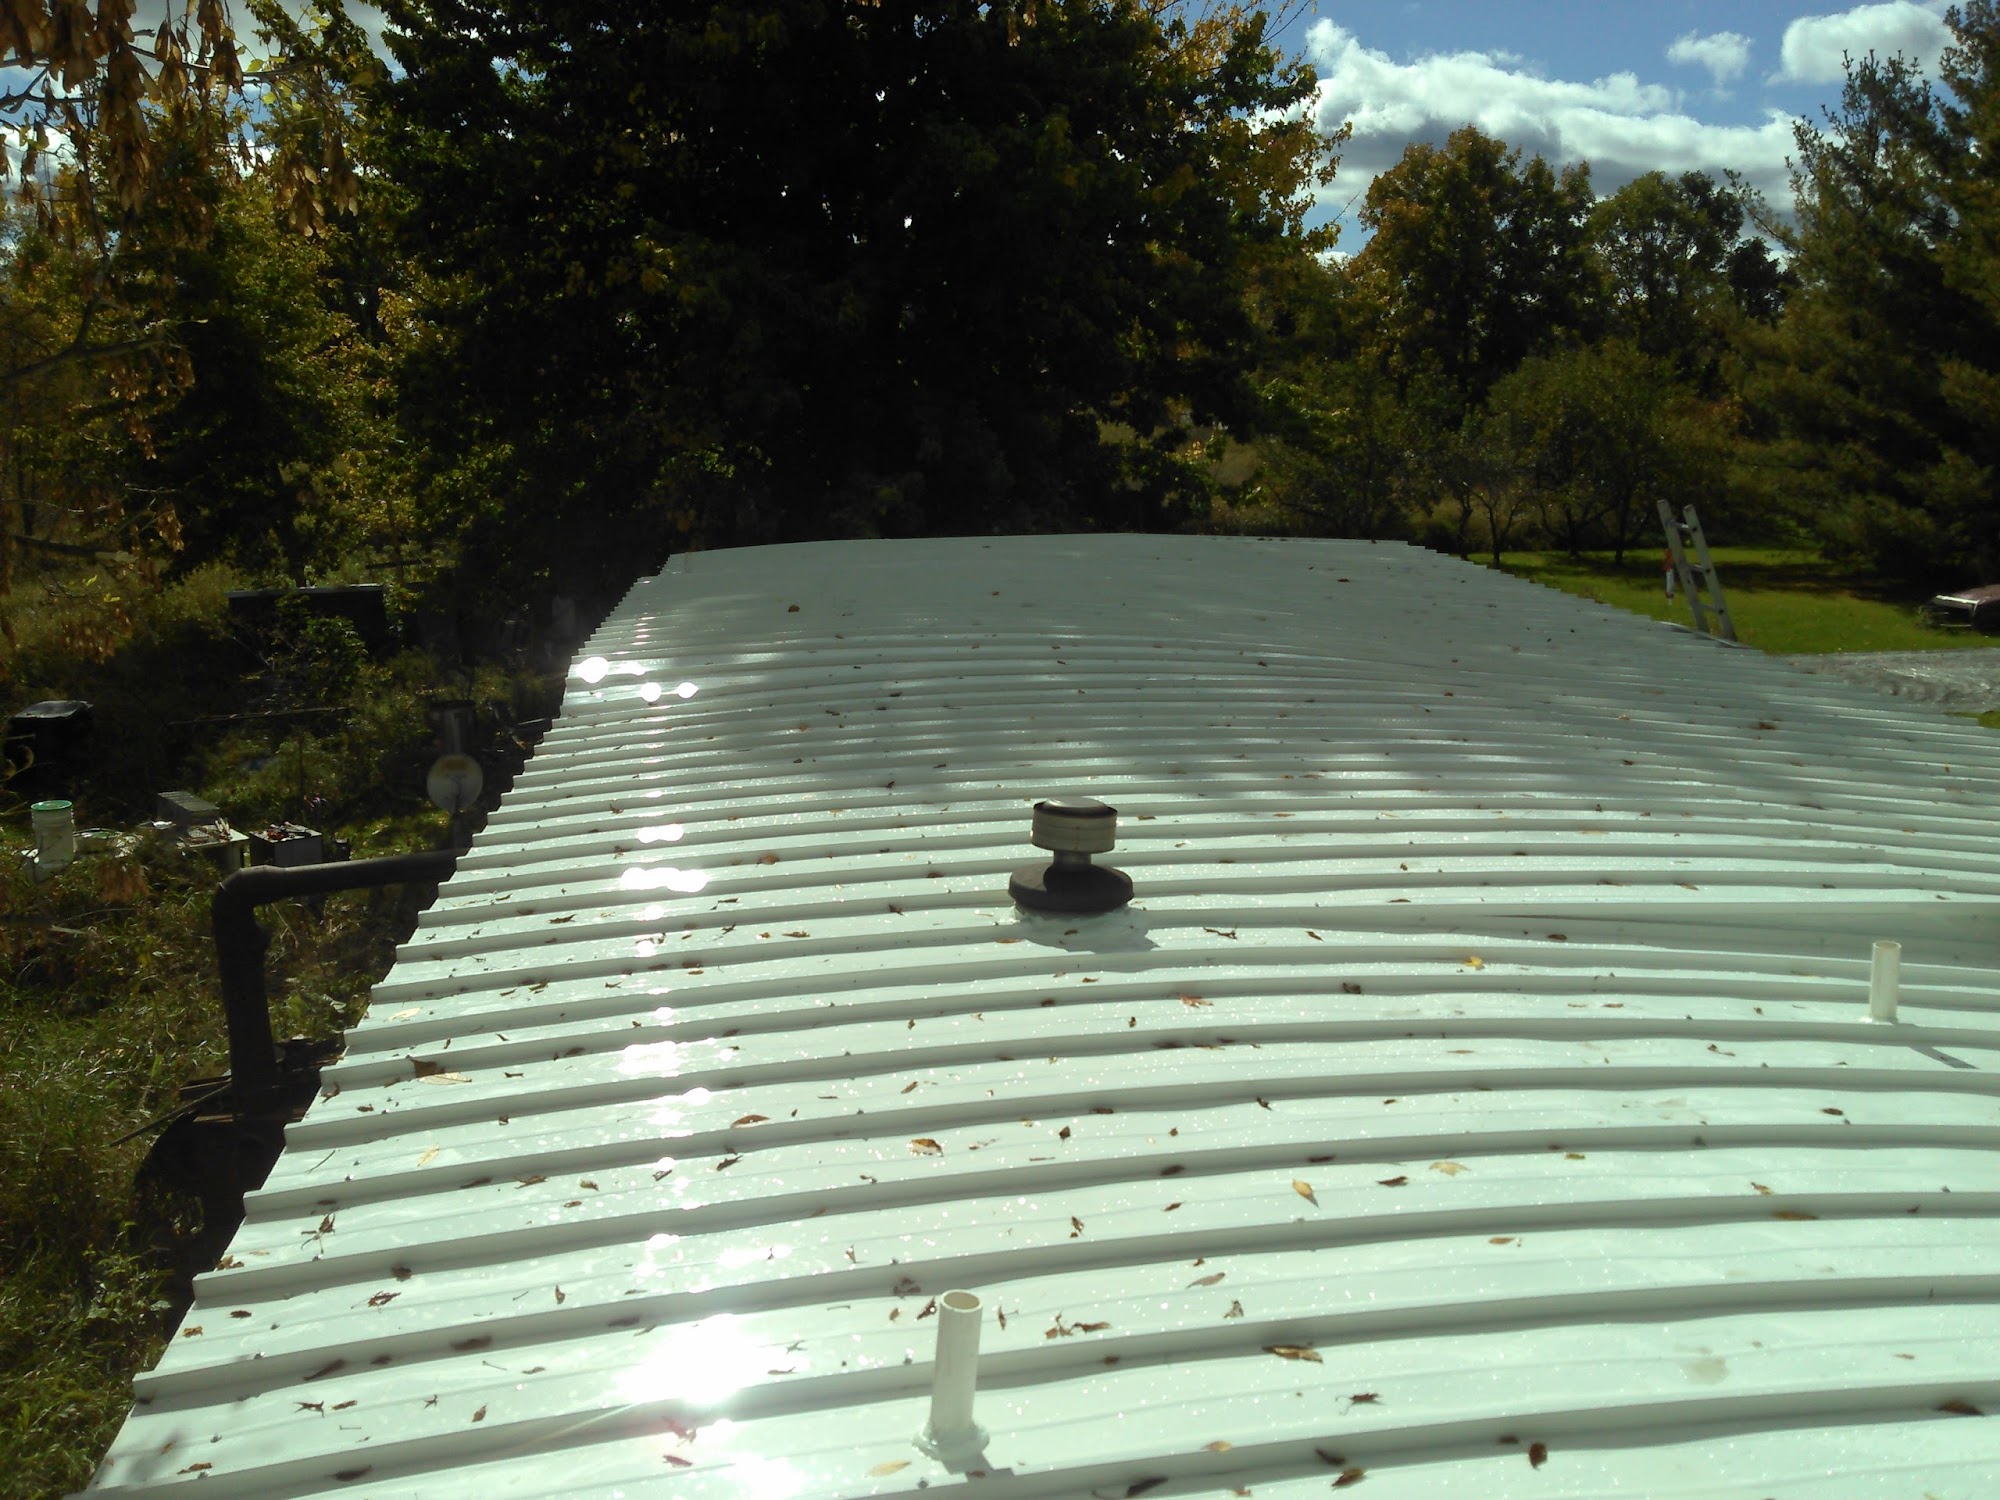 A-1 Mobile Roof-Over Systems Inc. 37648 24th Ave, Gobles Michigan 49055